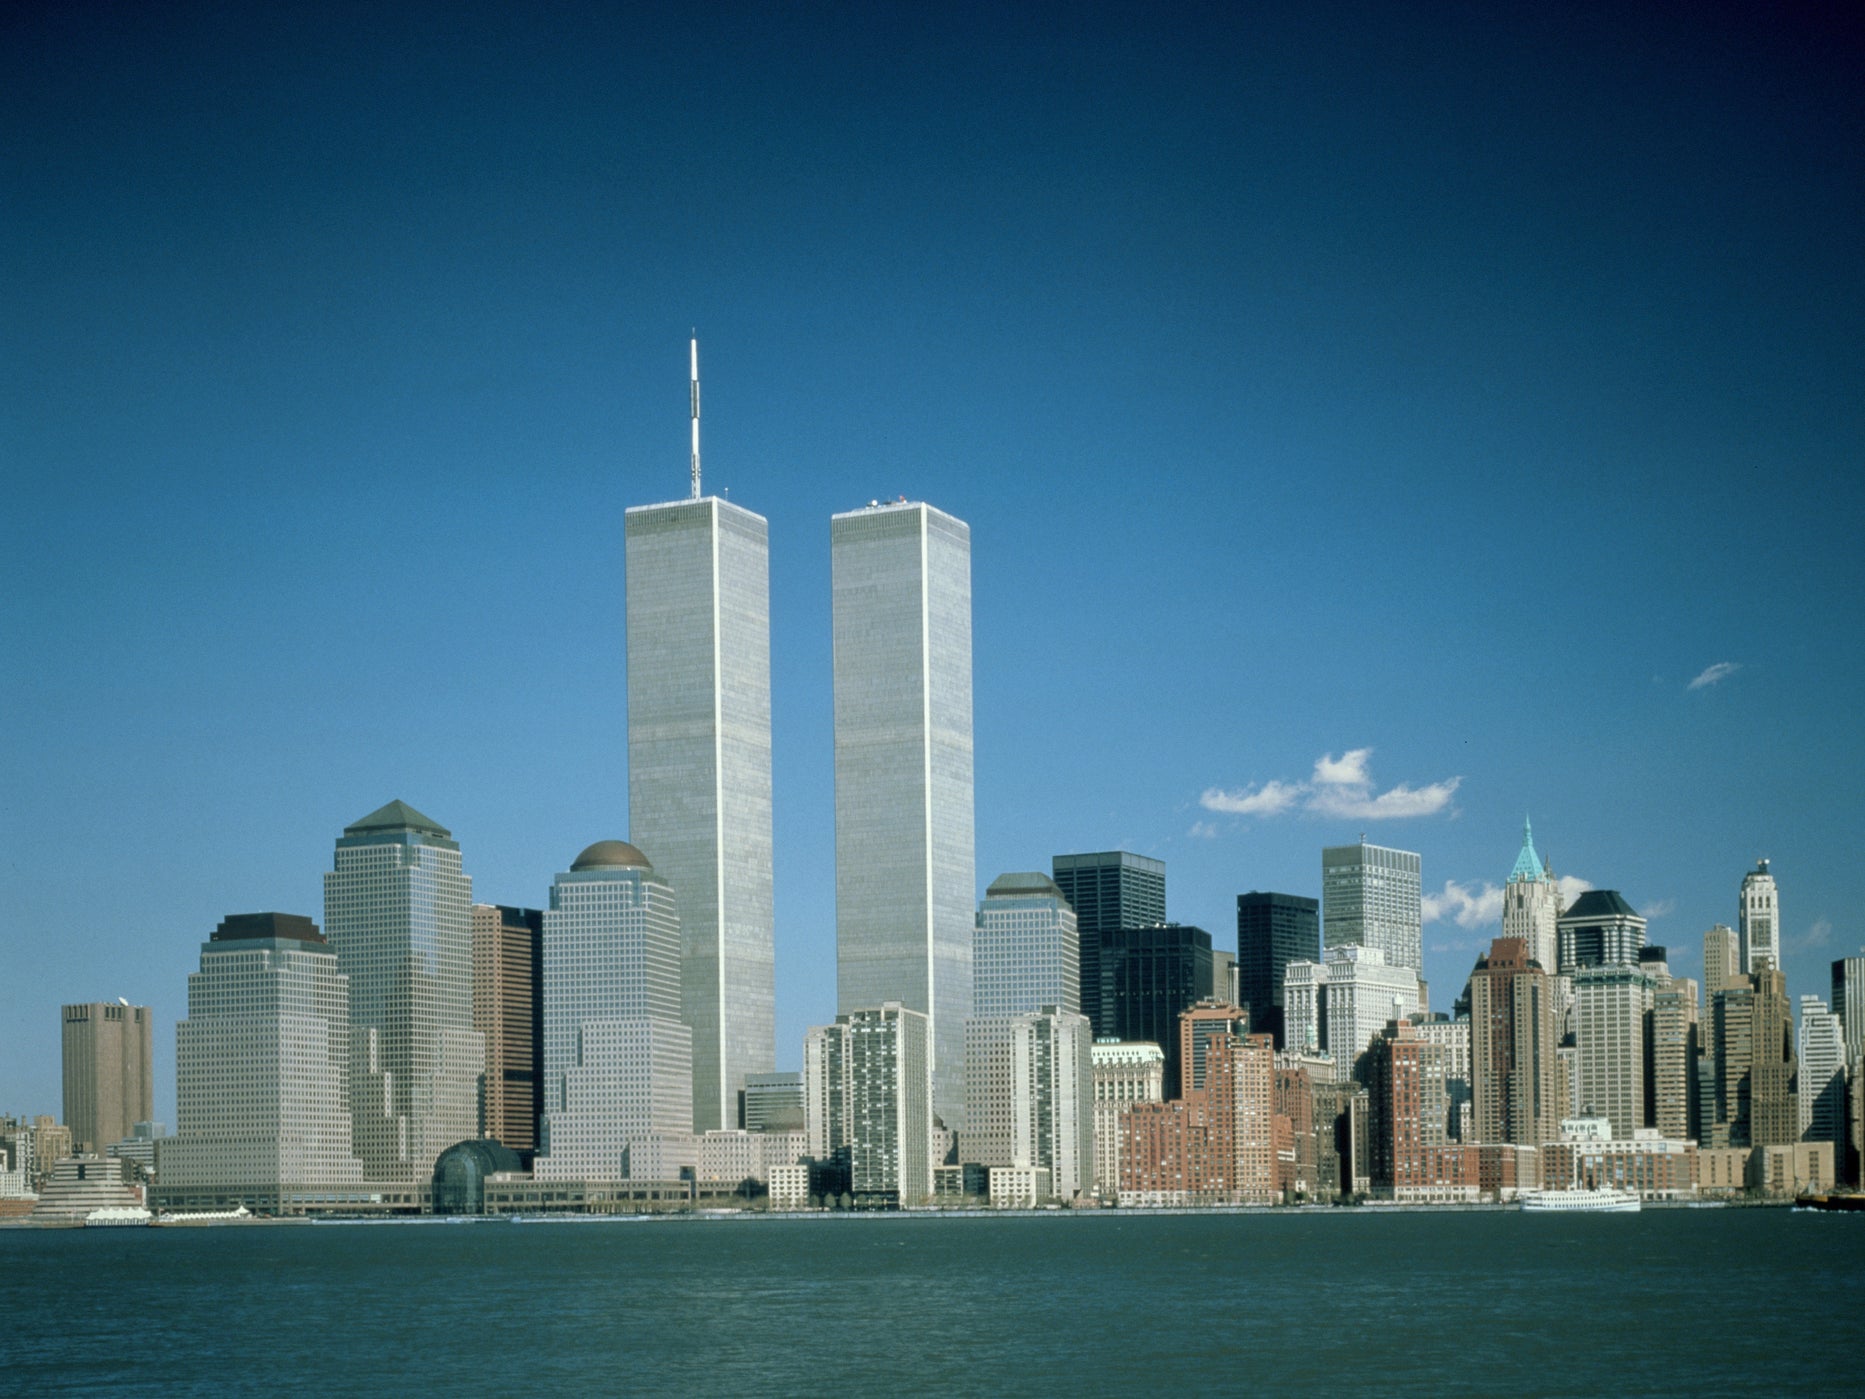 A photo of the New York City skyline featuring the Twin Towers of the World Trade Center before they were destroyed